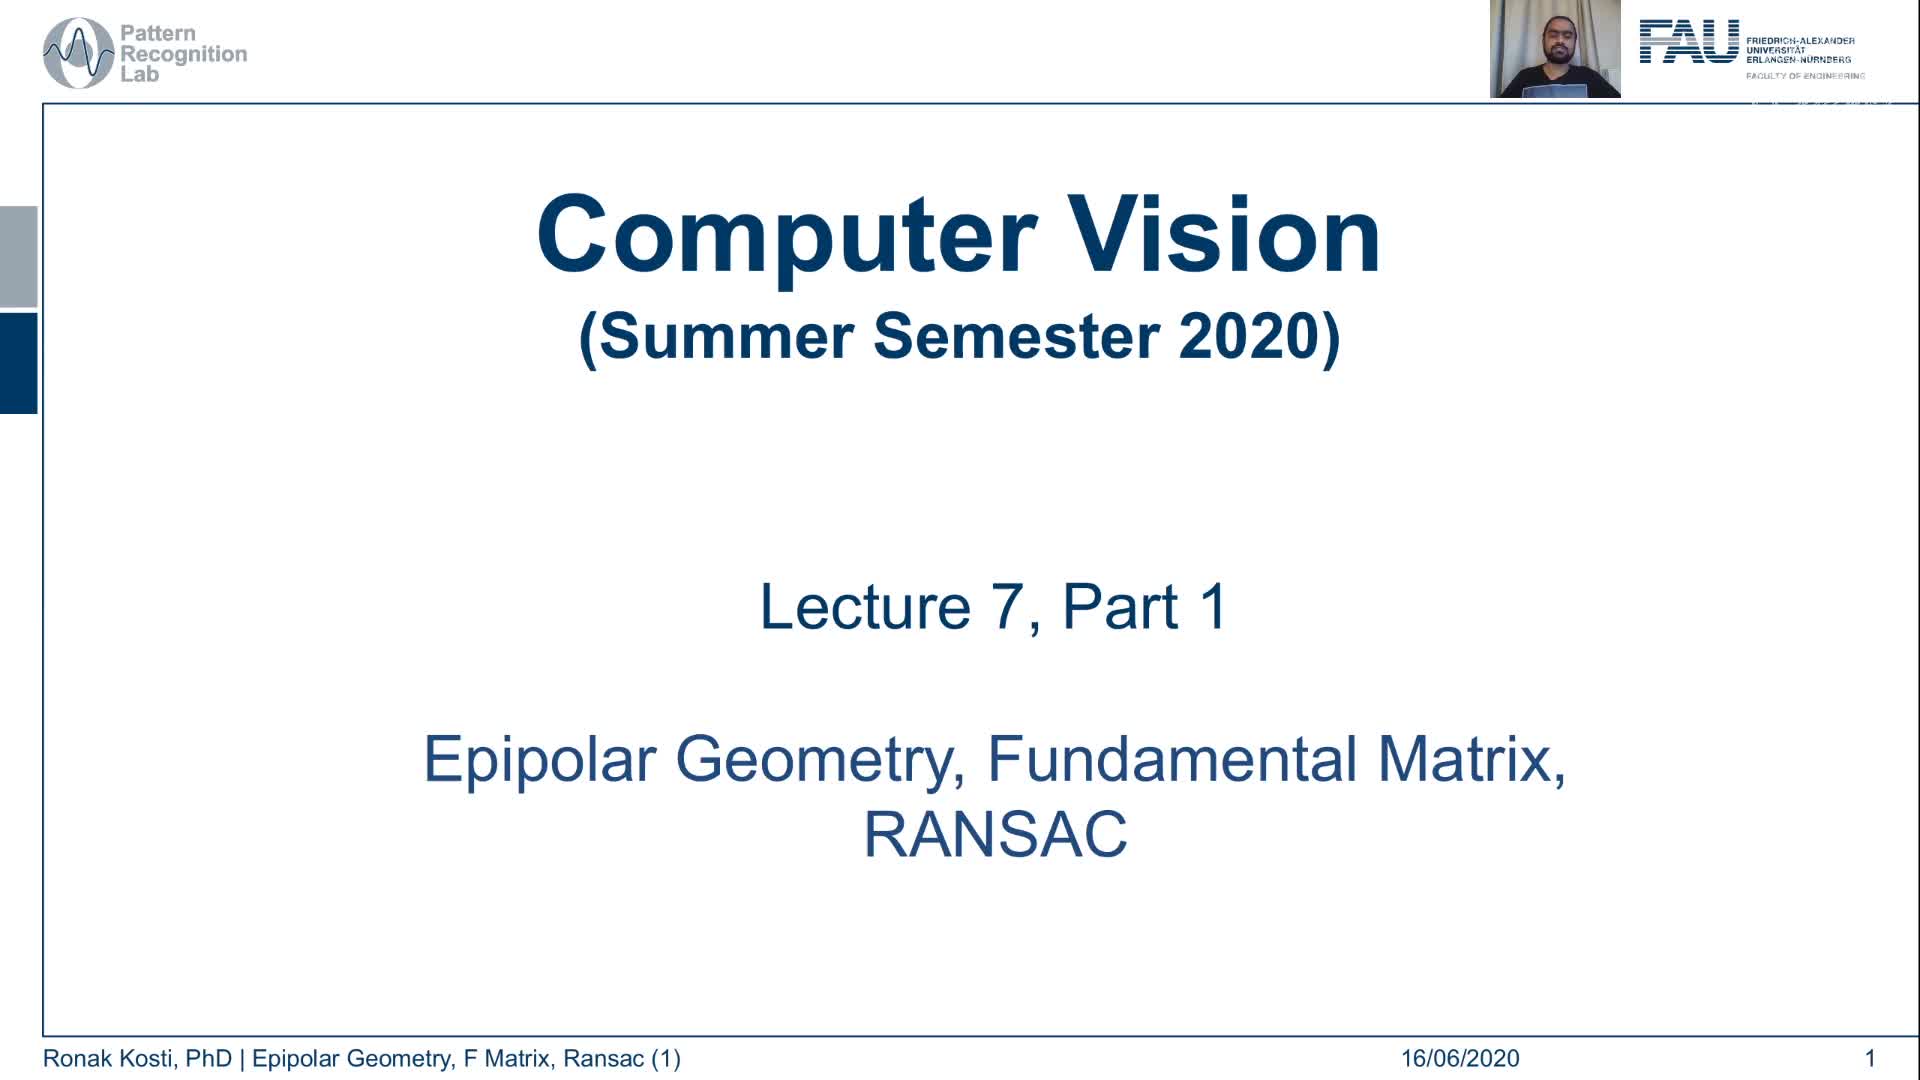 (Lecture 7, Part 1) Epipolar Geometry and Ransac preview image